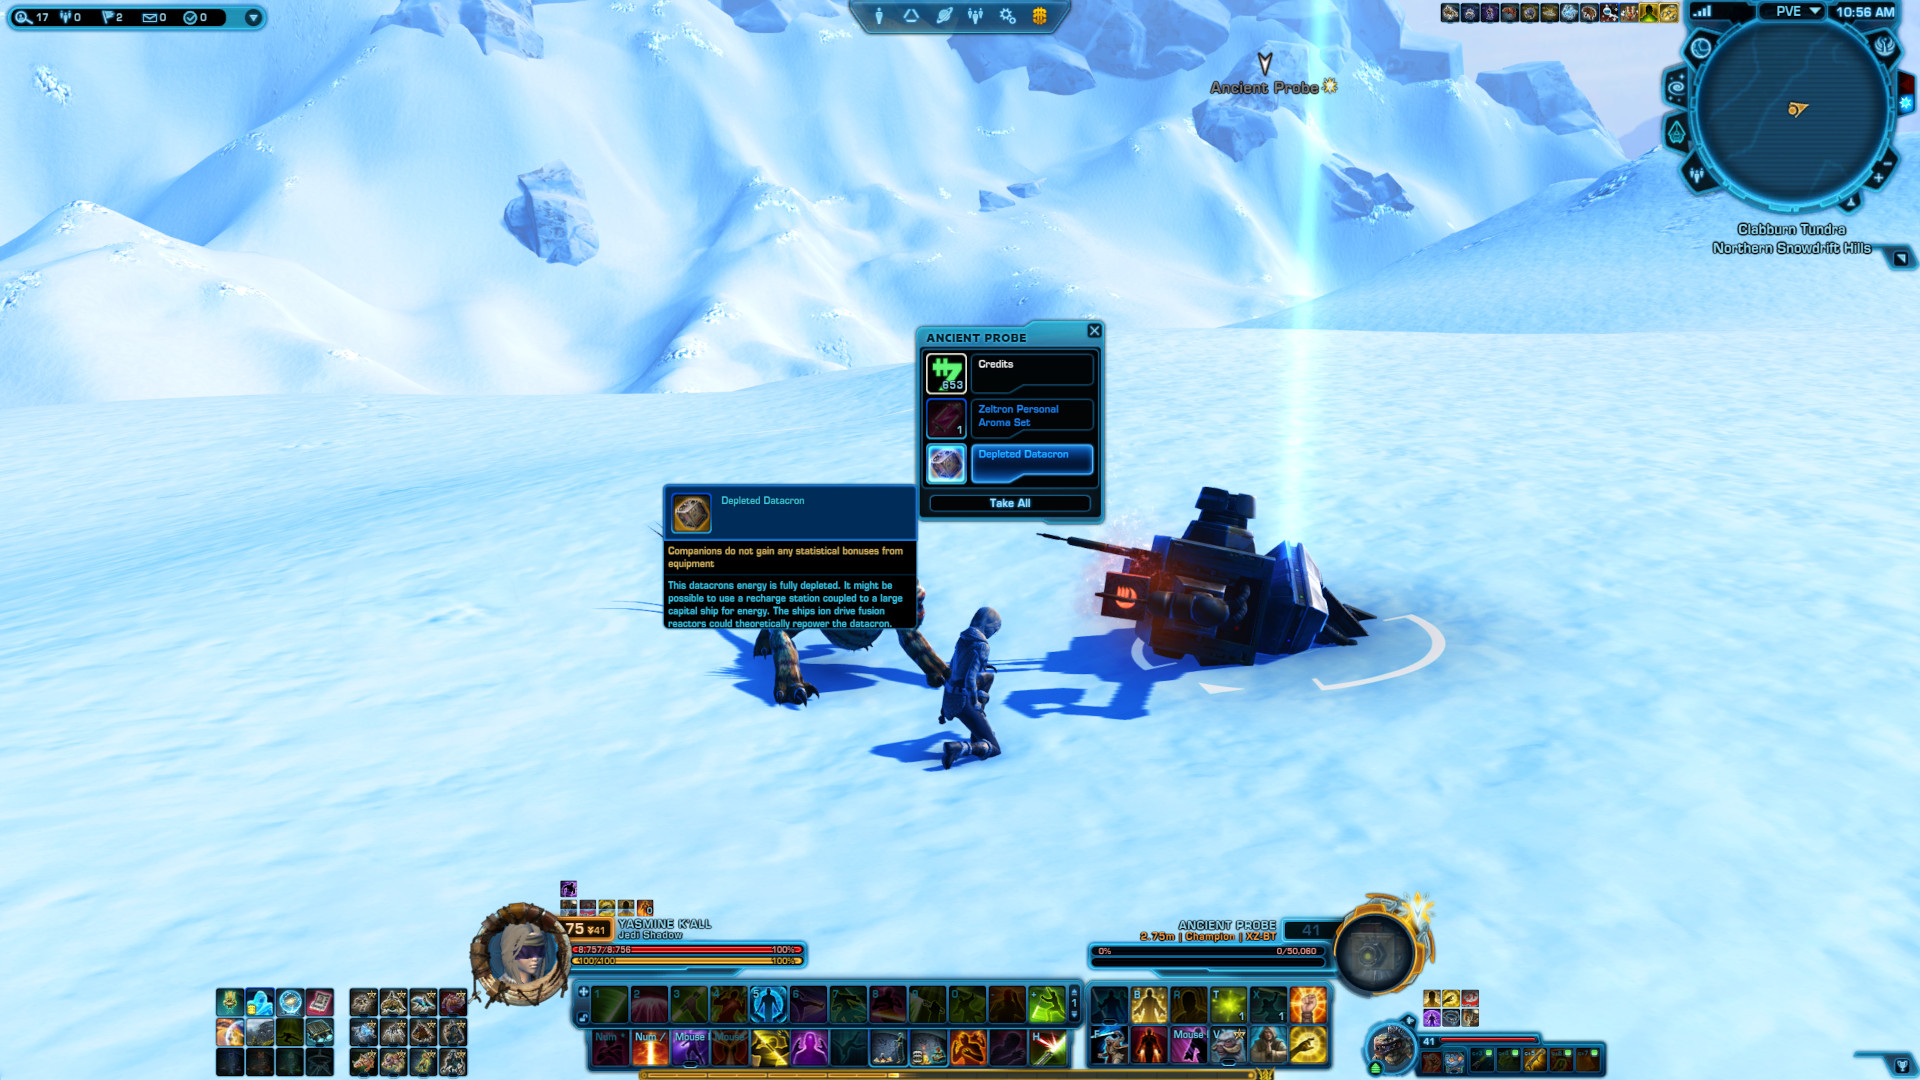 SWTOR Hoth Red Mastery Datacron Location Guide - Illeva